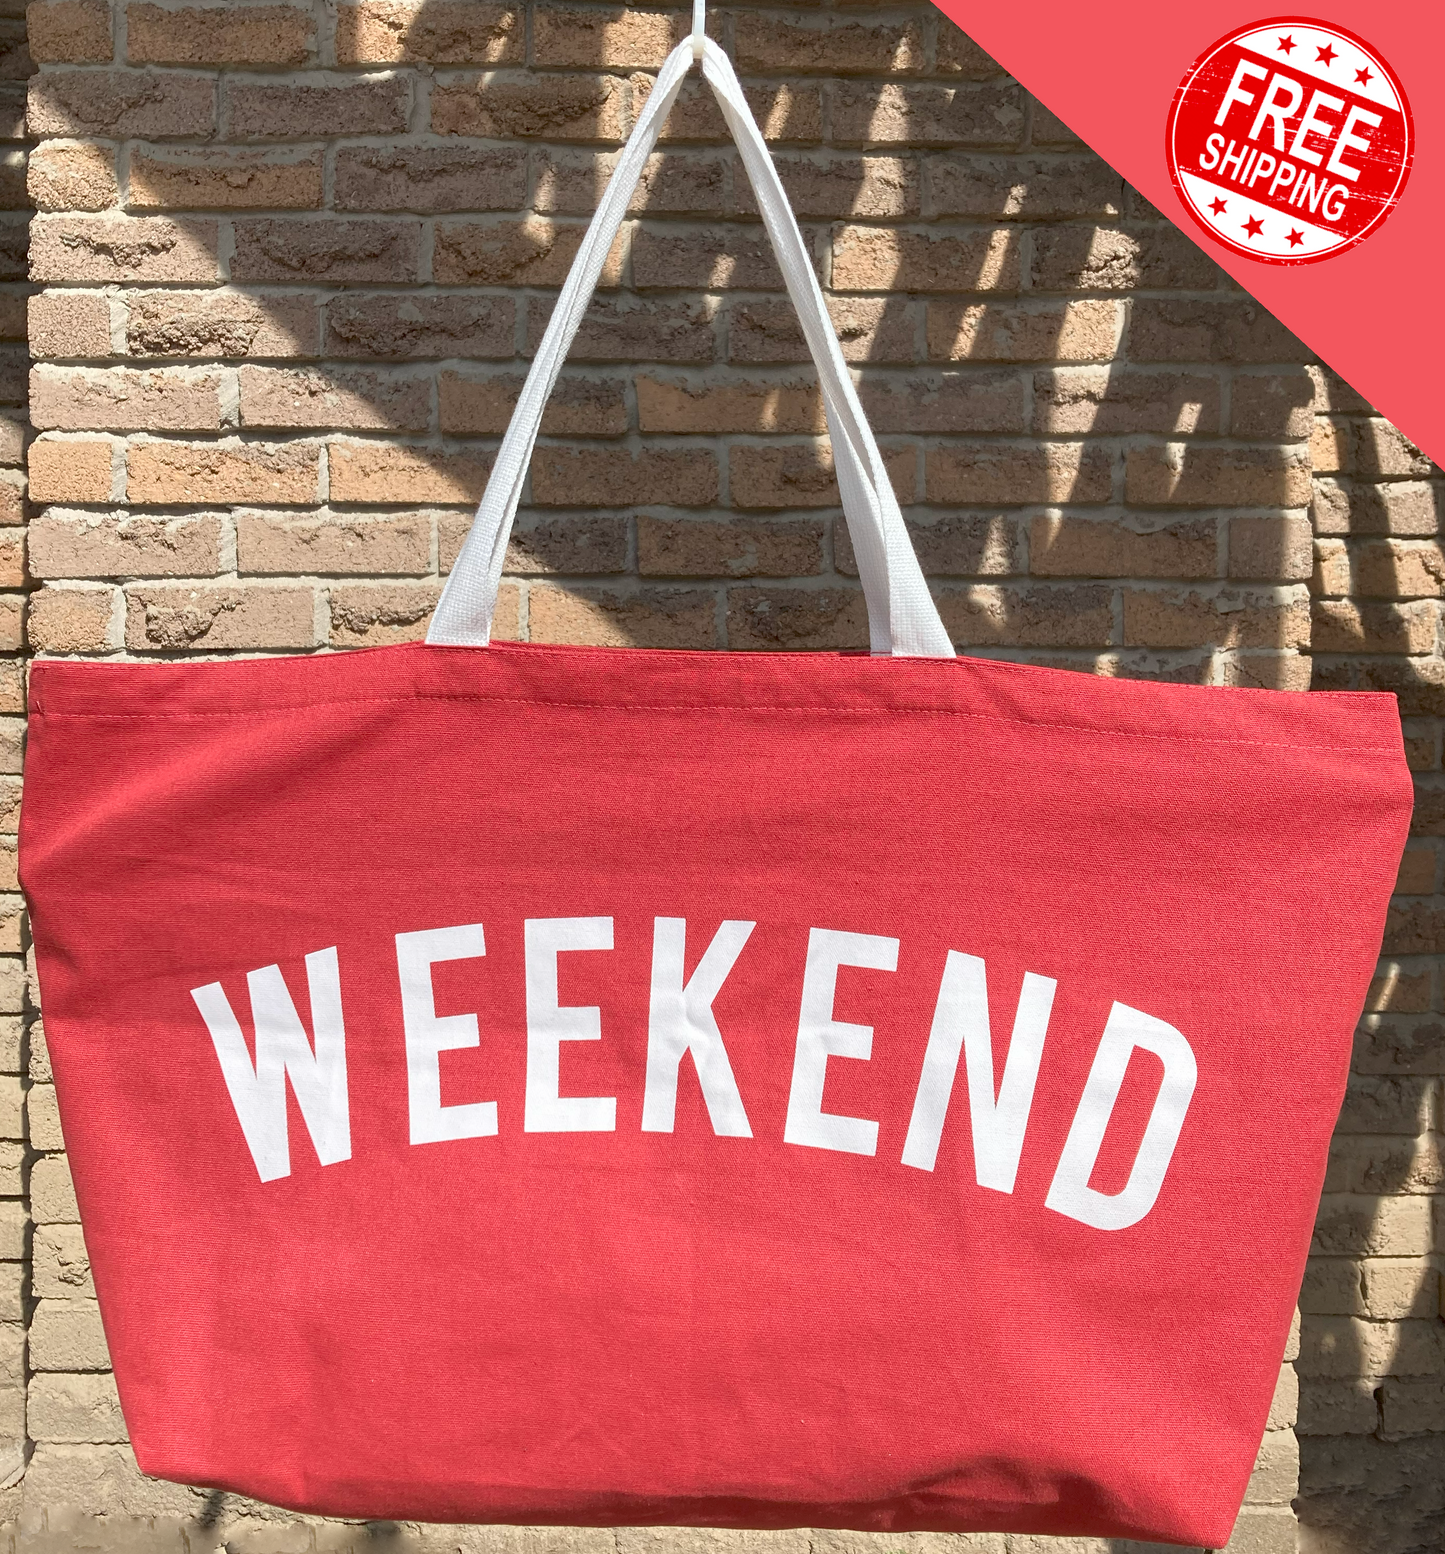 Extra Large Weekend Canvas Tote Bag - Terracotta Red (FREE SHIPPING)